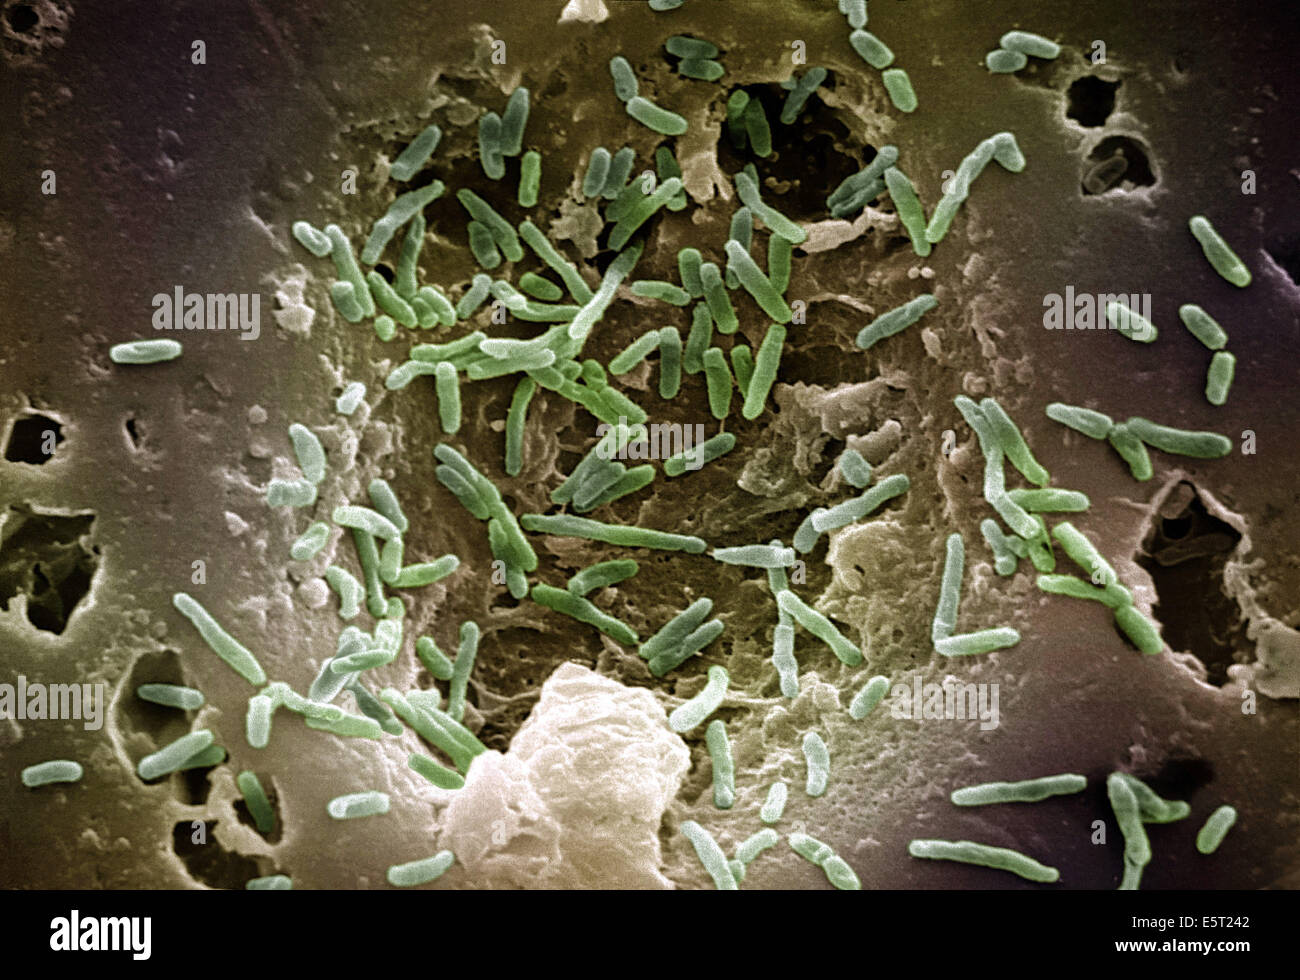 Scanning Electron Micrograph (SEM)of Mycobacterium chelonae, a bacterium causing postoperative wound infections in soft tissue Stock Photo